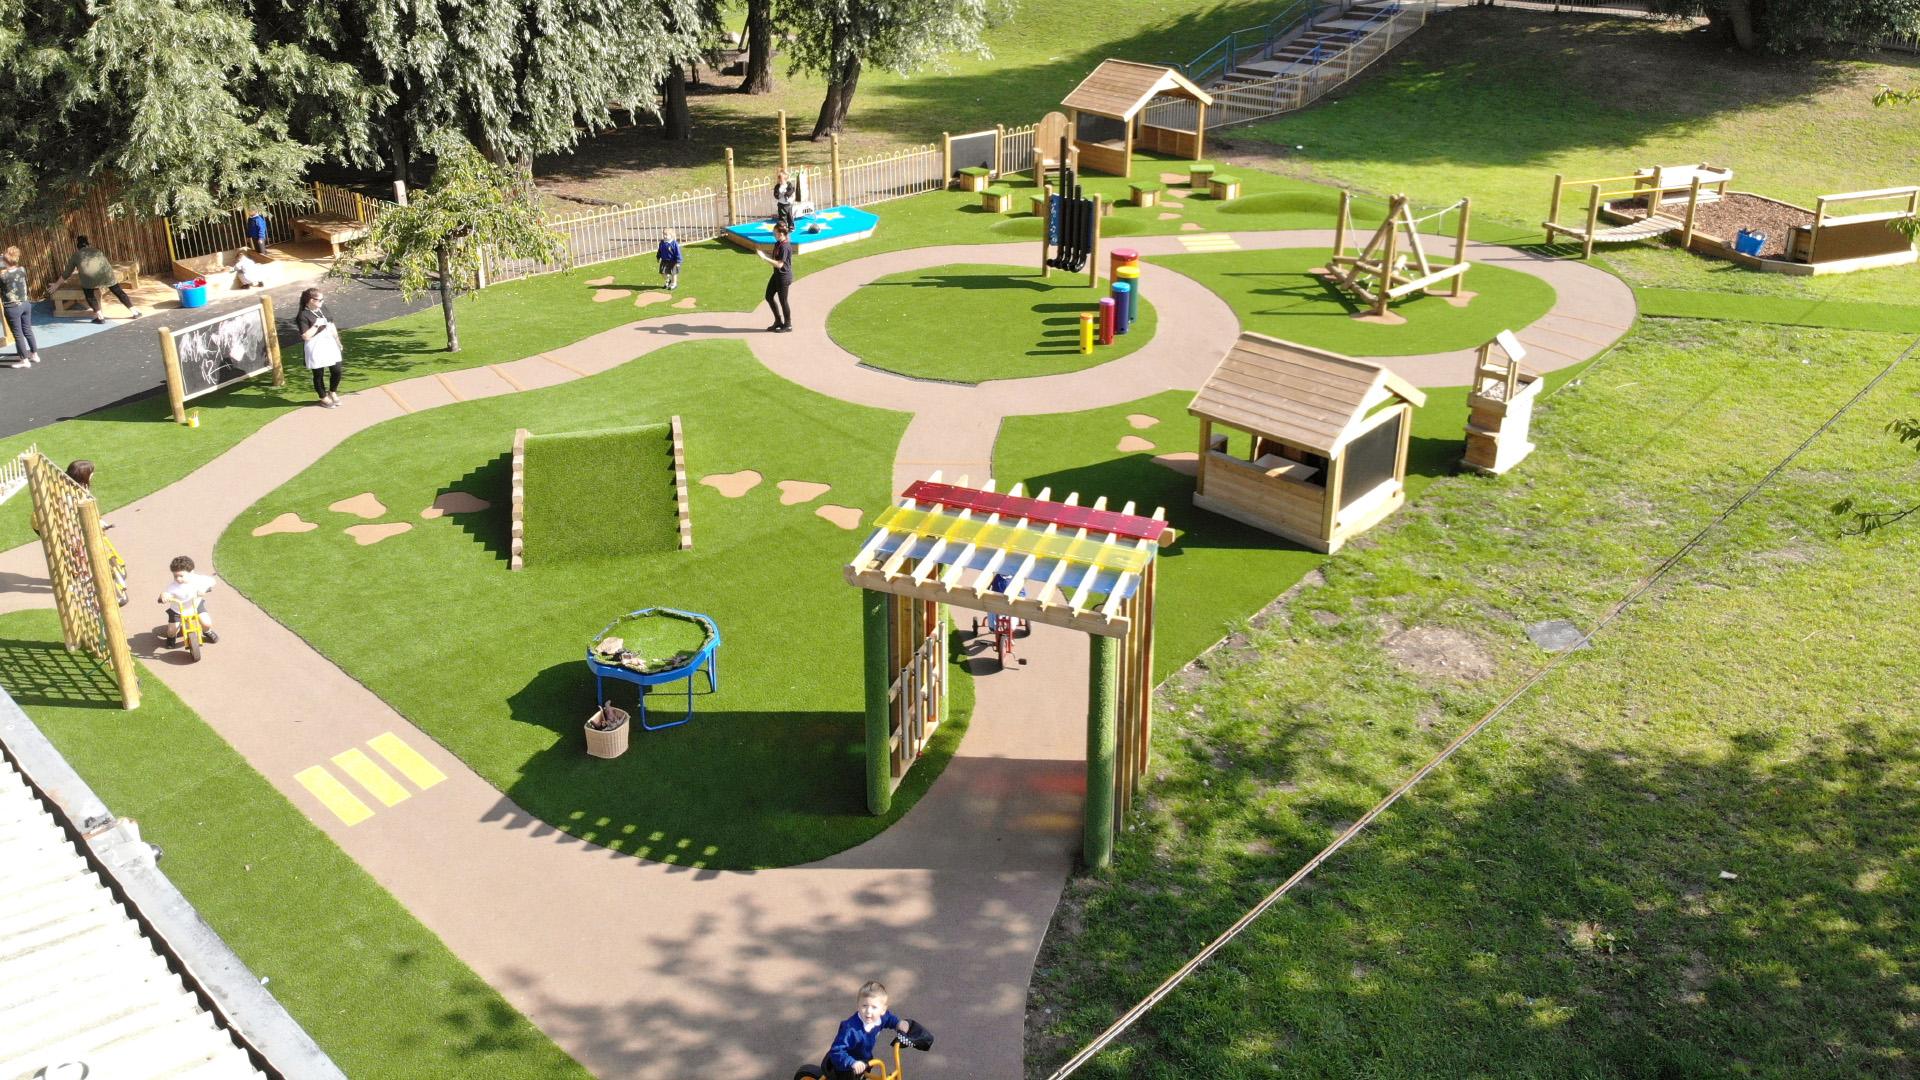 large outdoor EYFS play area for students to develop their physical and social skills